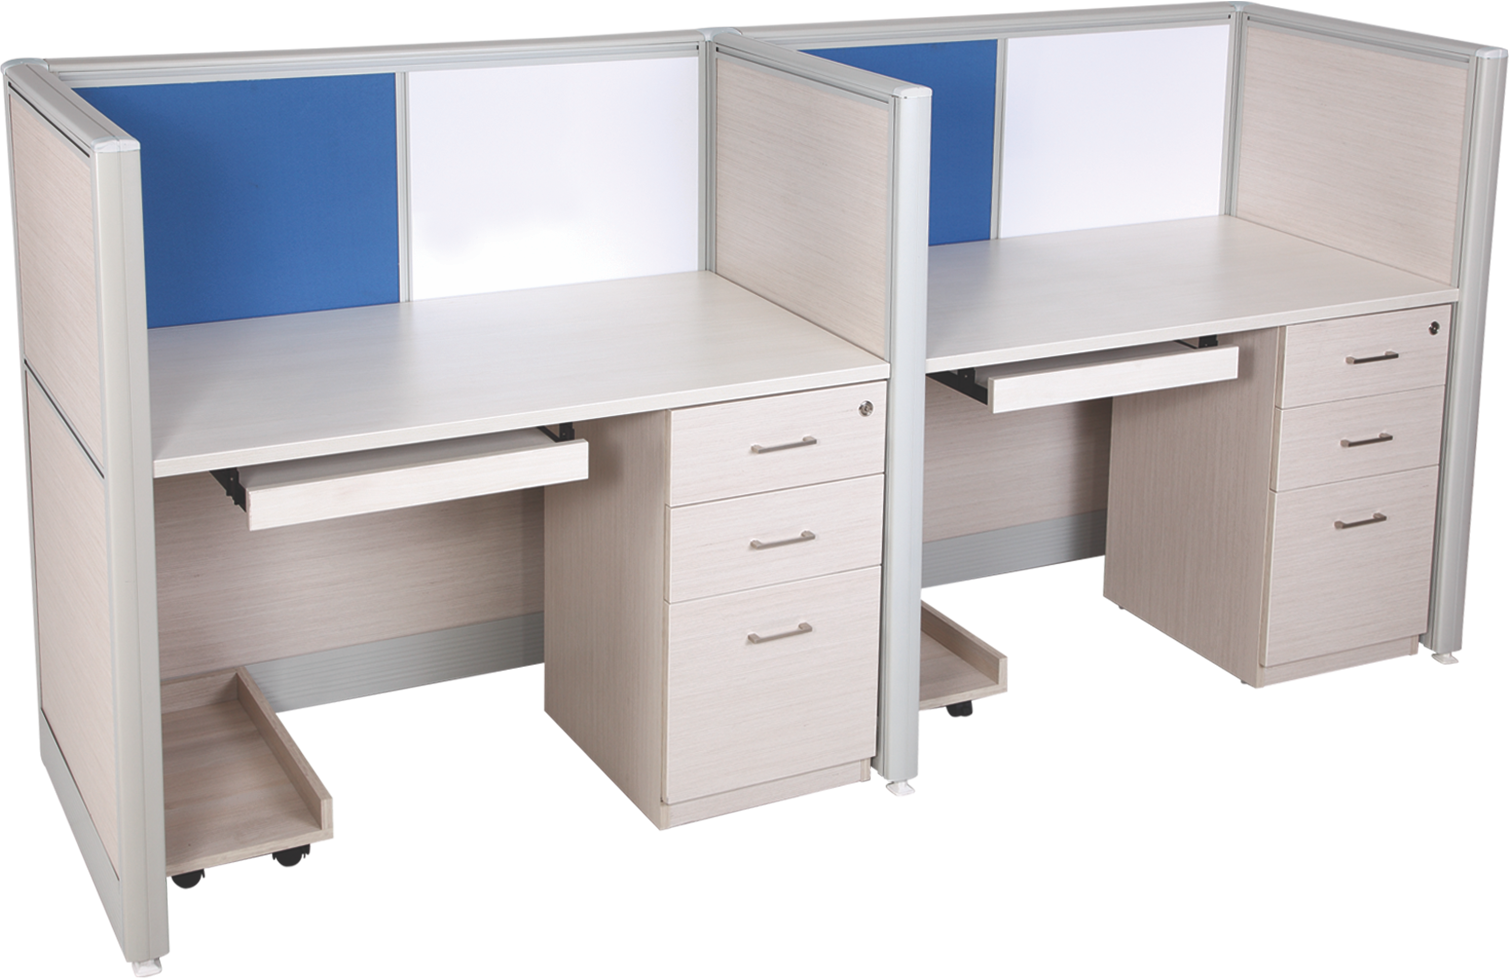 MAX 2 - Workstation Table